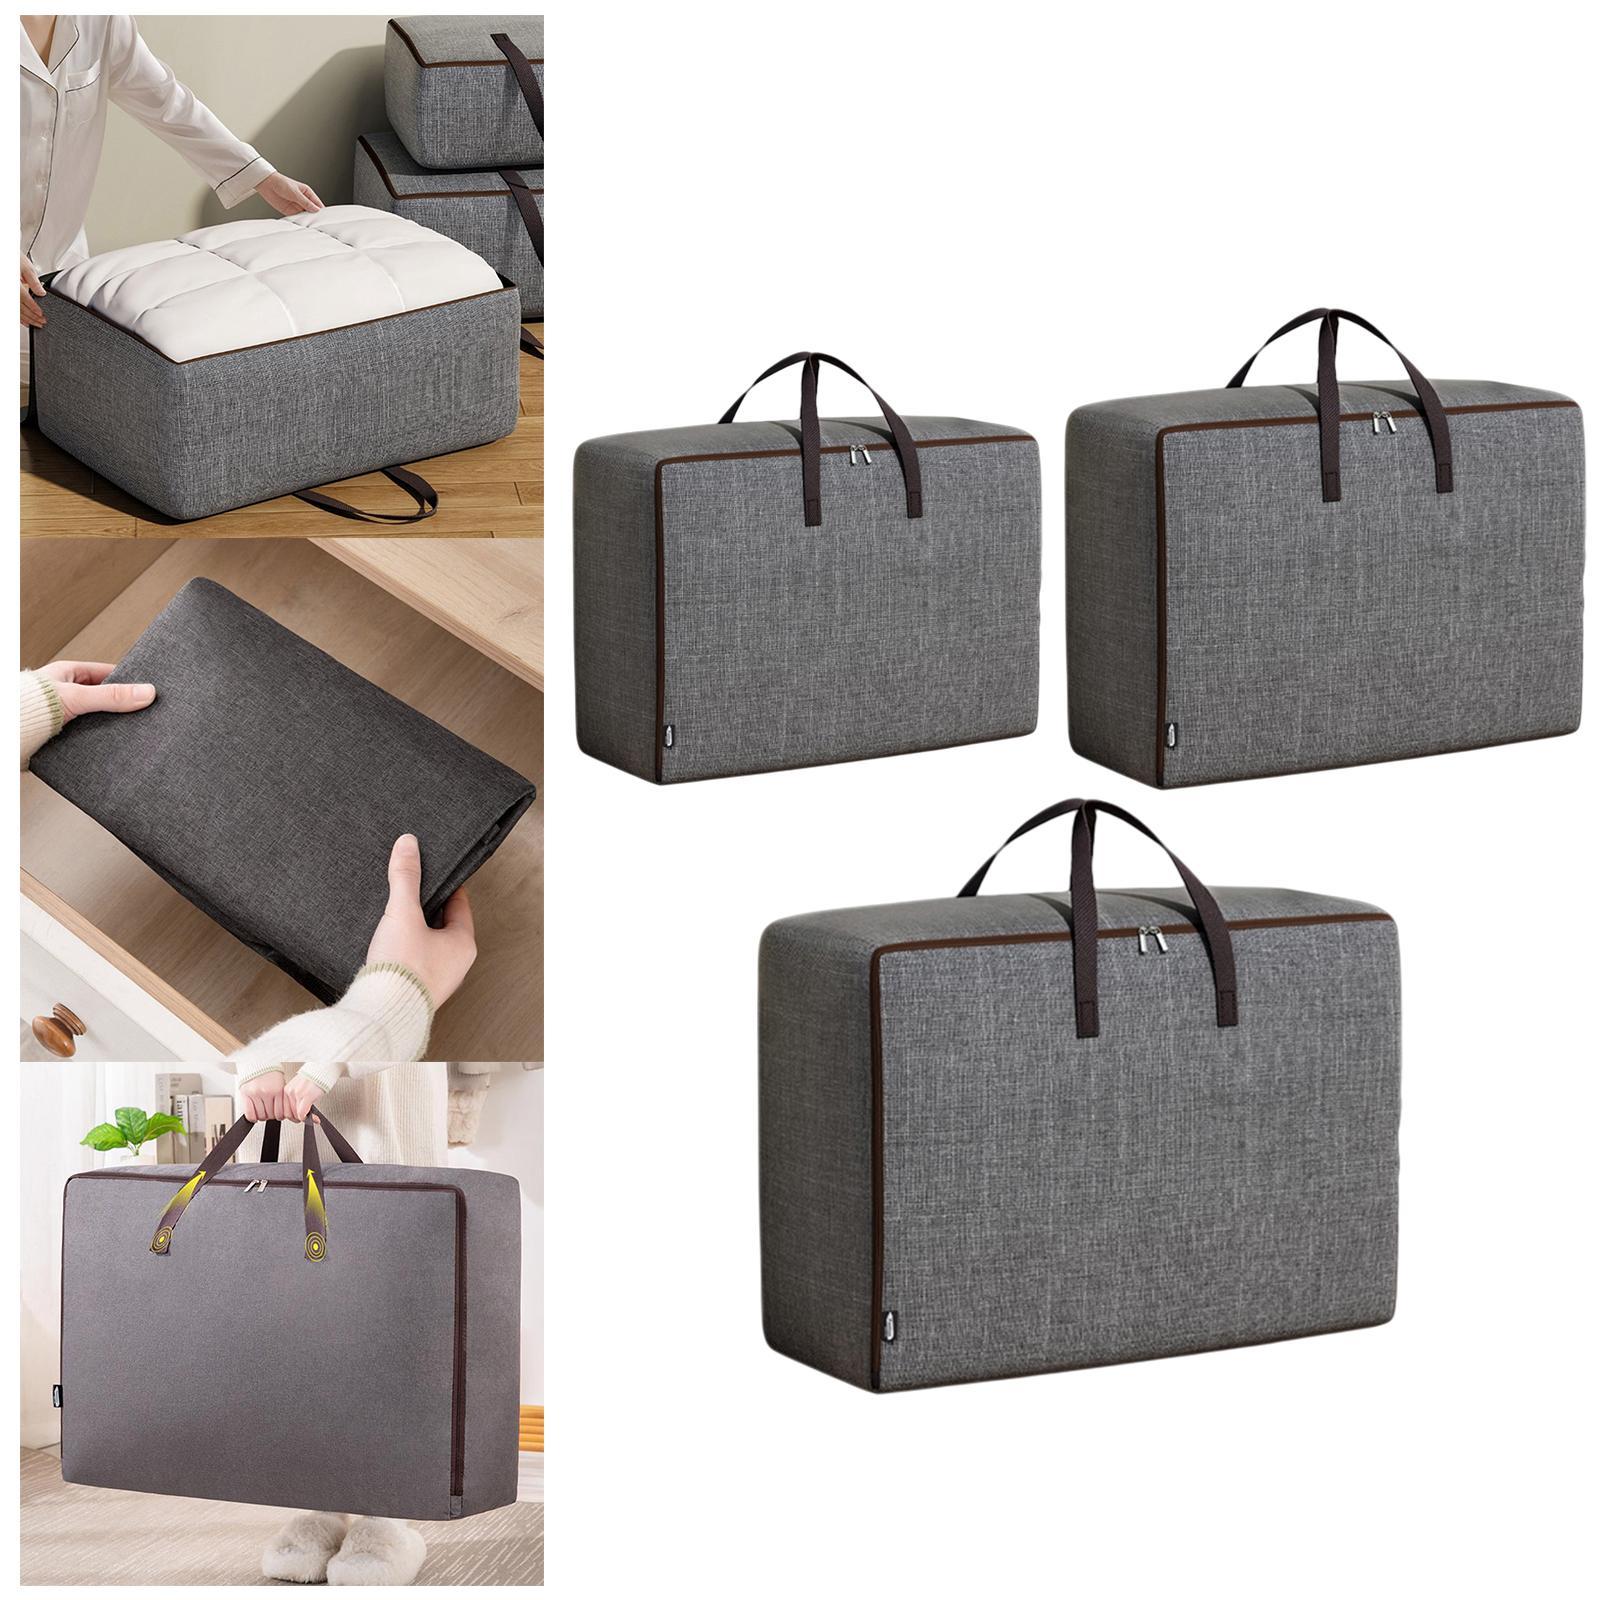 Blanket Clothes Organizer Foldable Storage Cubes for Clothes Sweater Bedroom